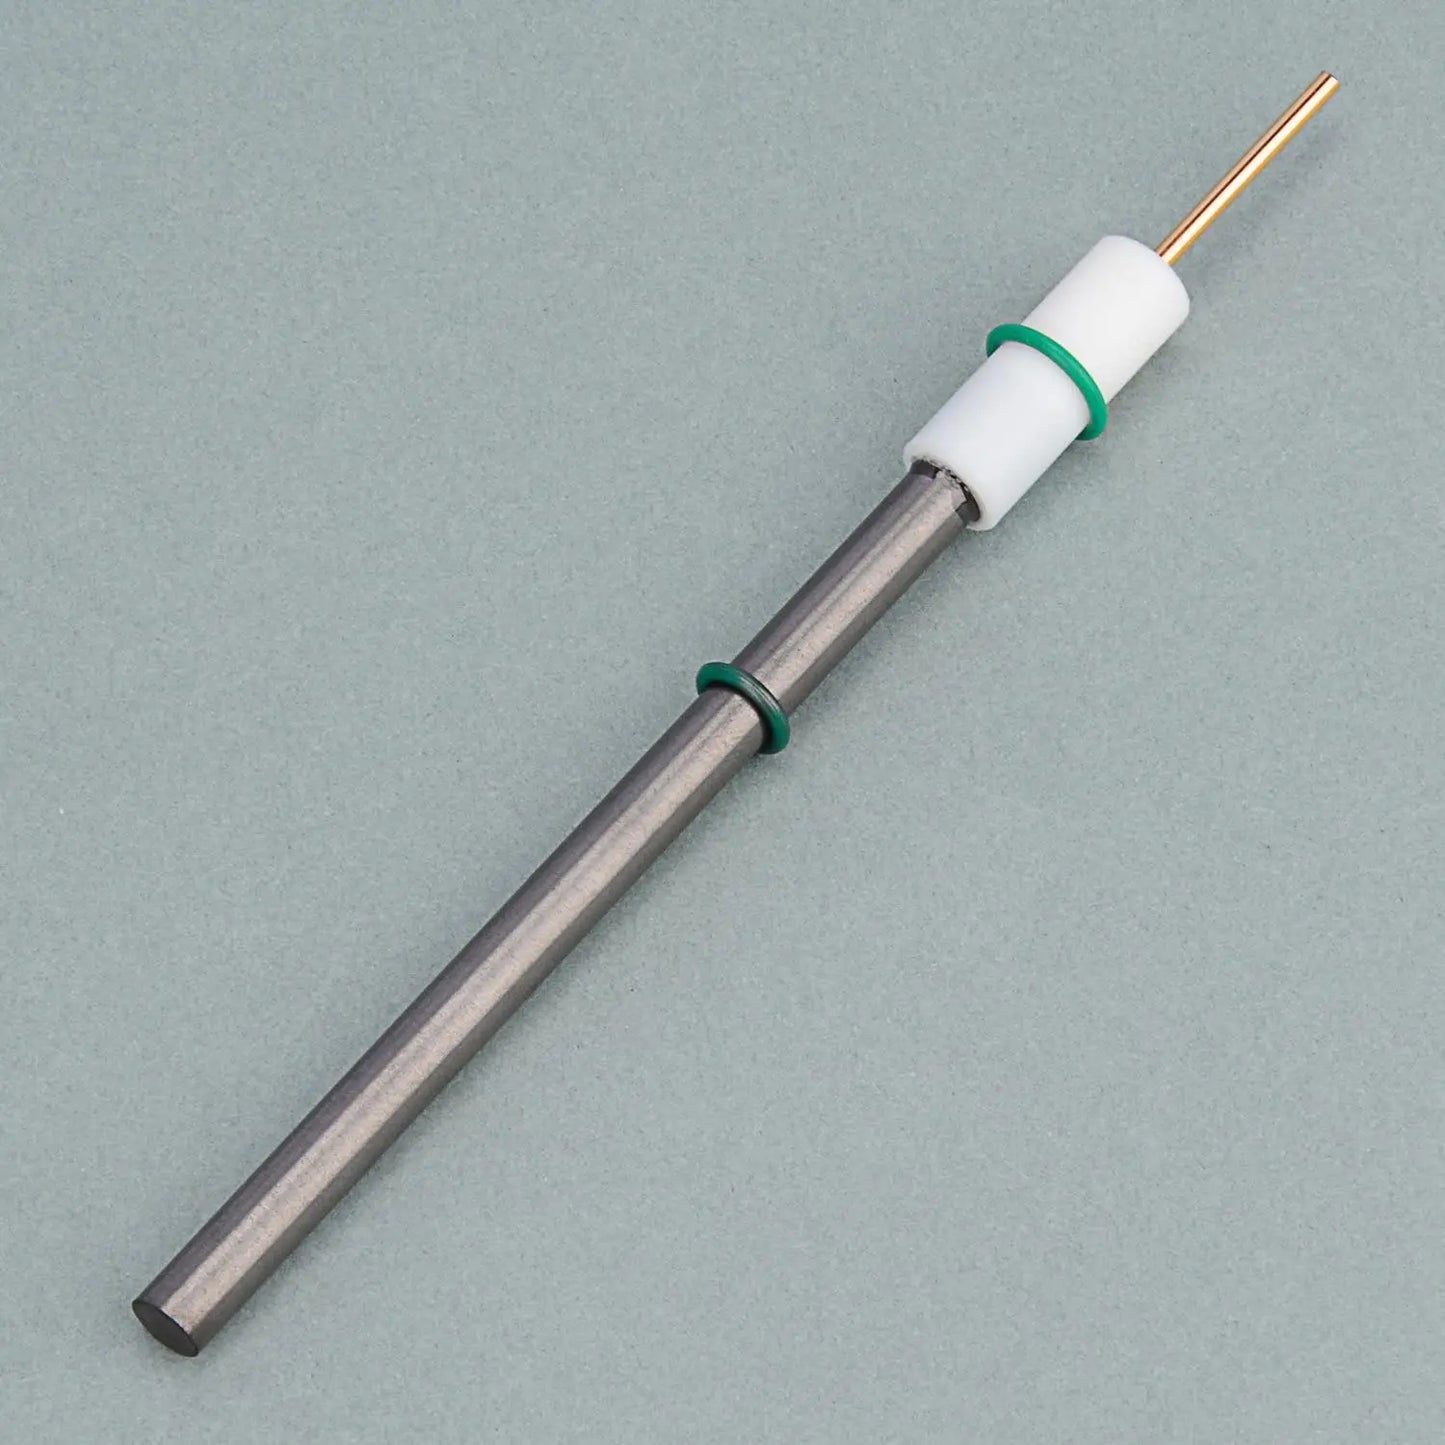 Graphite Rod Electrode with PTFE Adapter for Electrolytic Cell Electrochemistry - Electrode